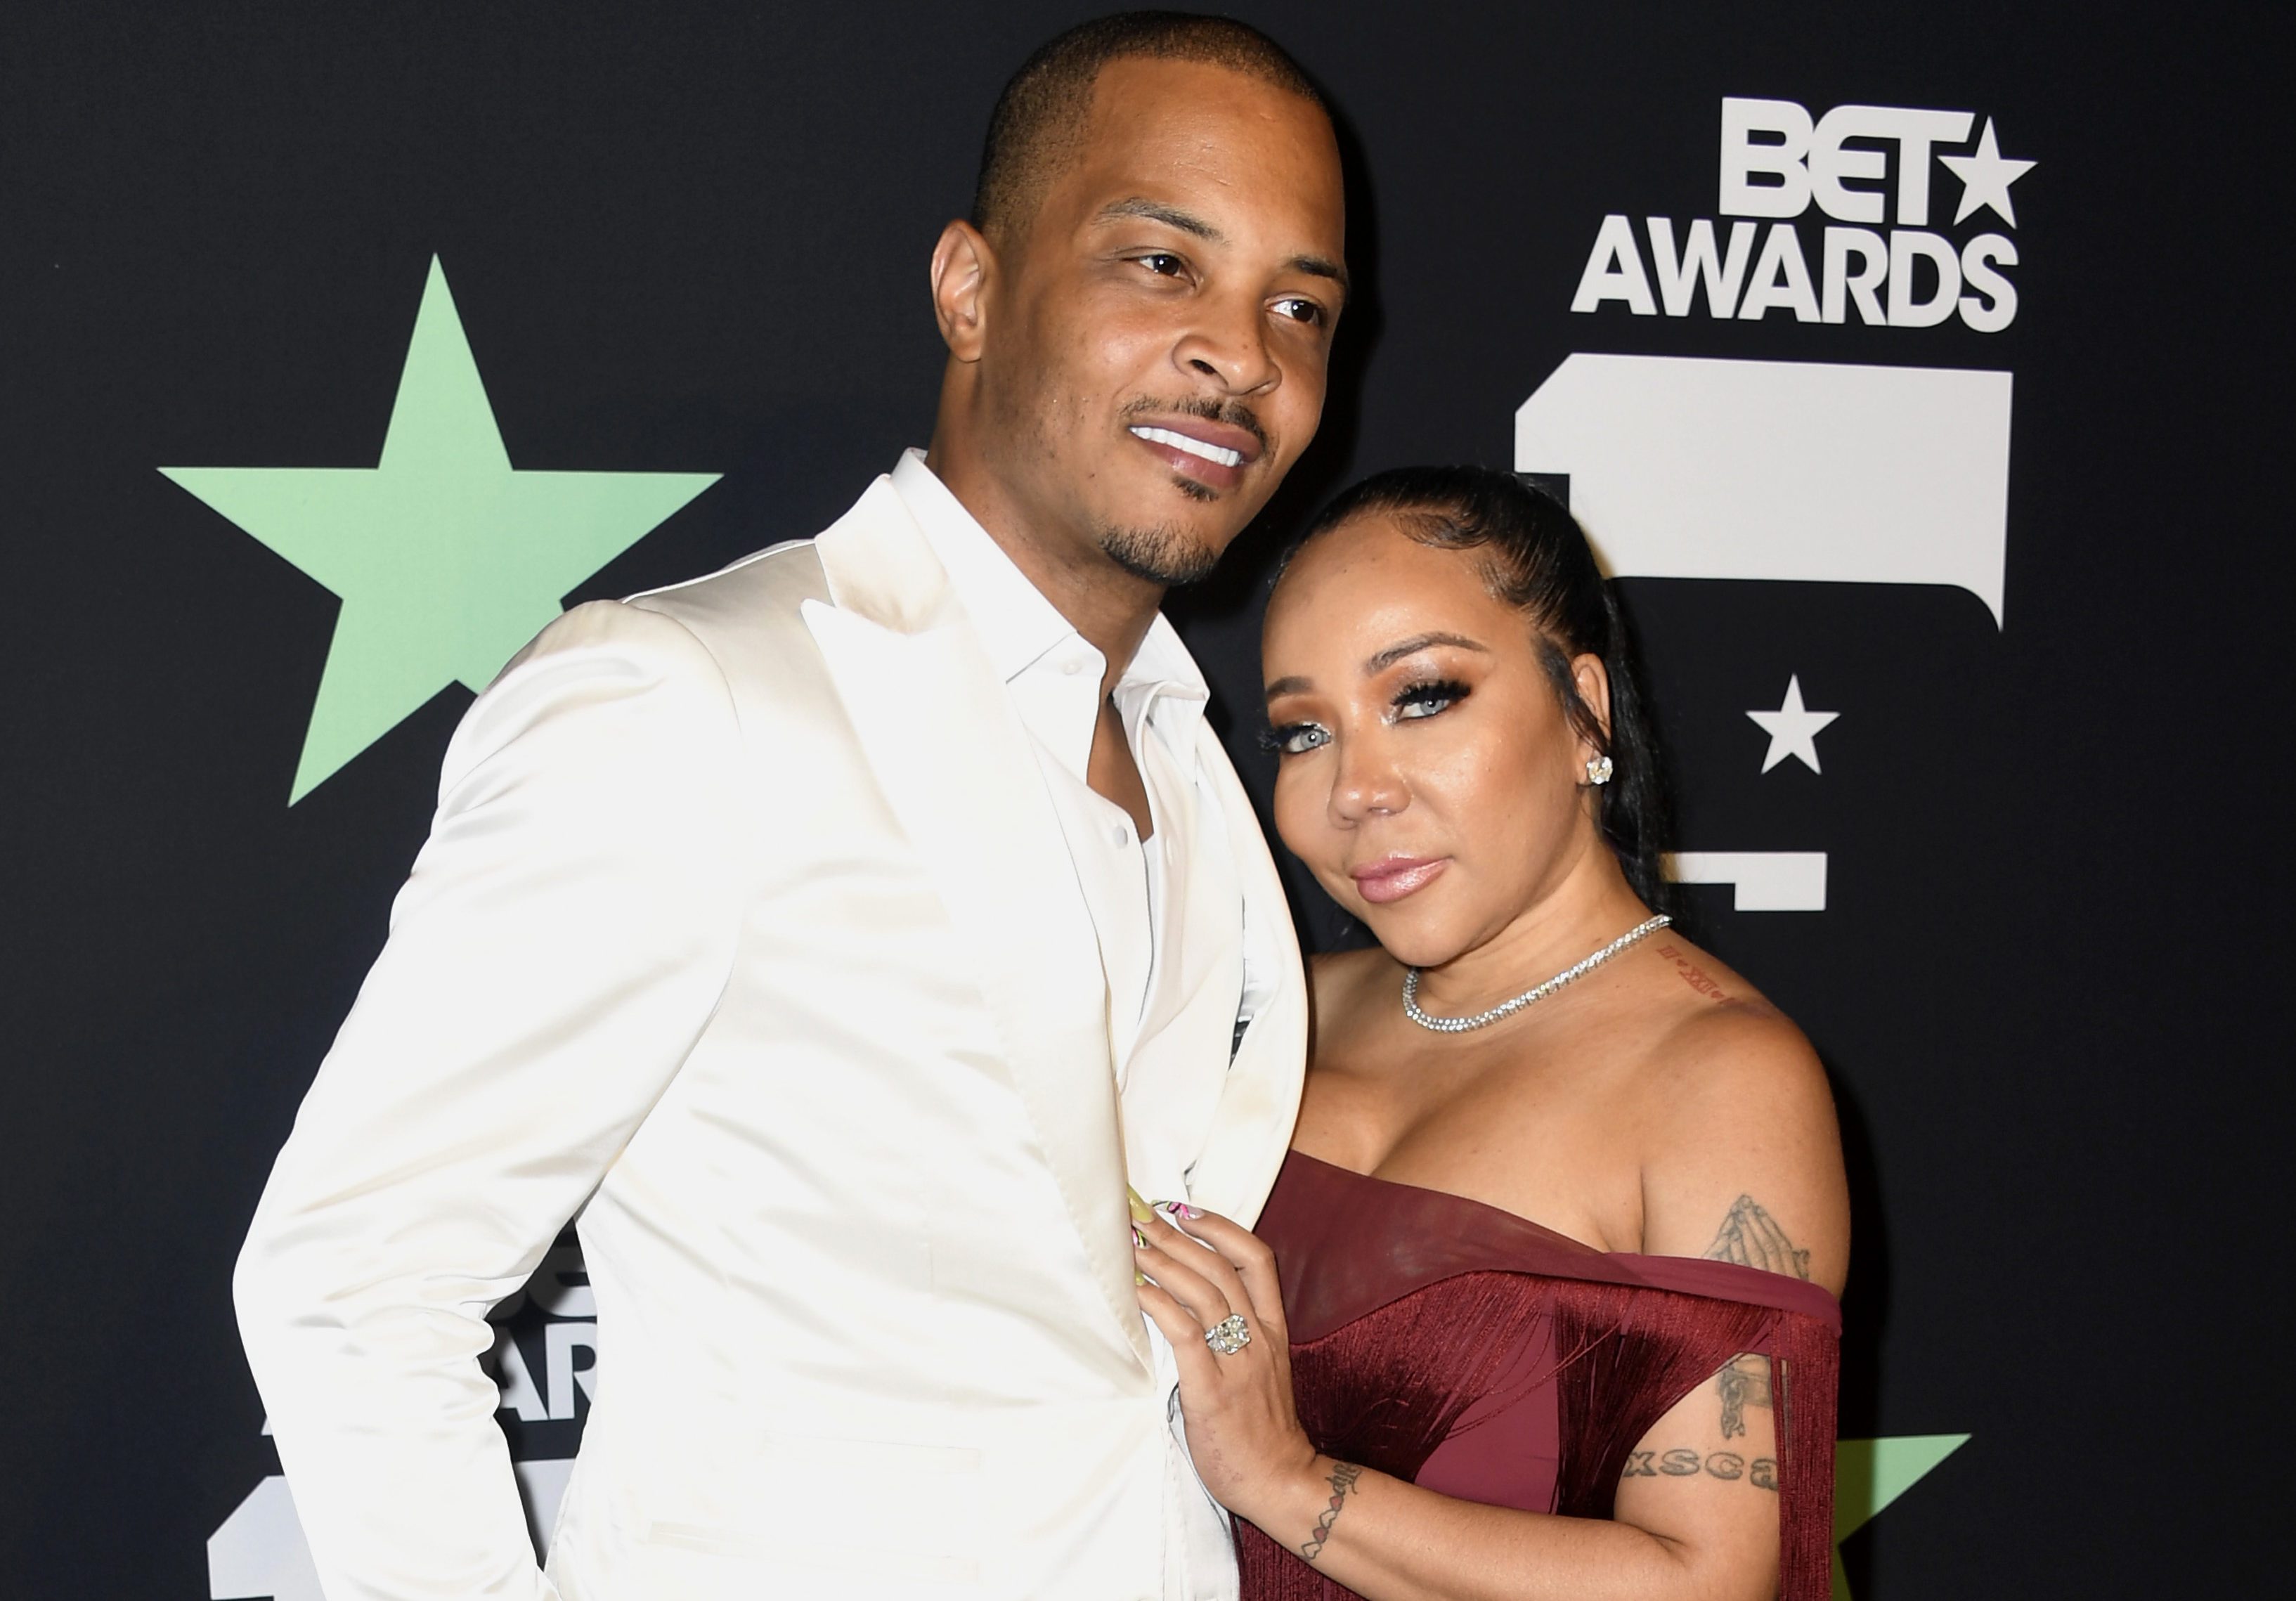 An attorney for T.I. and Tiny denies the new allegations made by a woman in Los Angeles and says the couple has not been contacted by police.